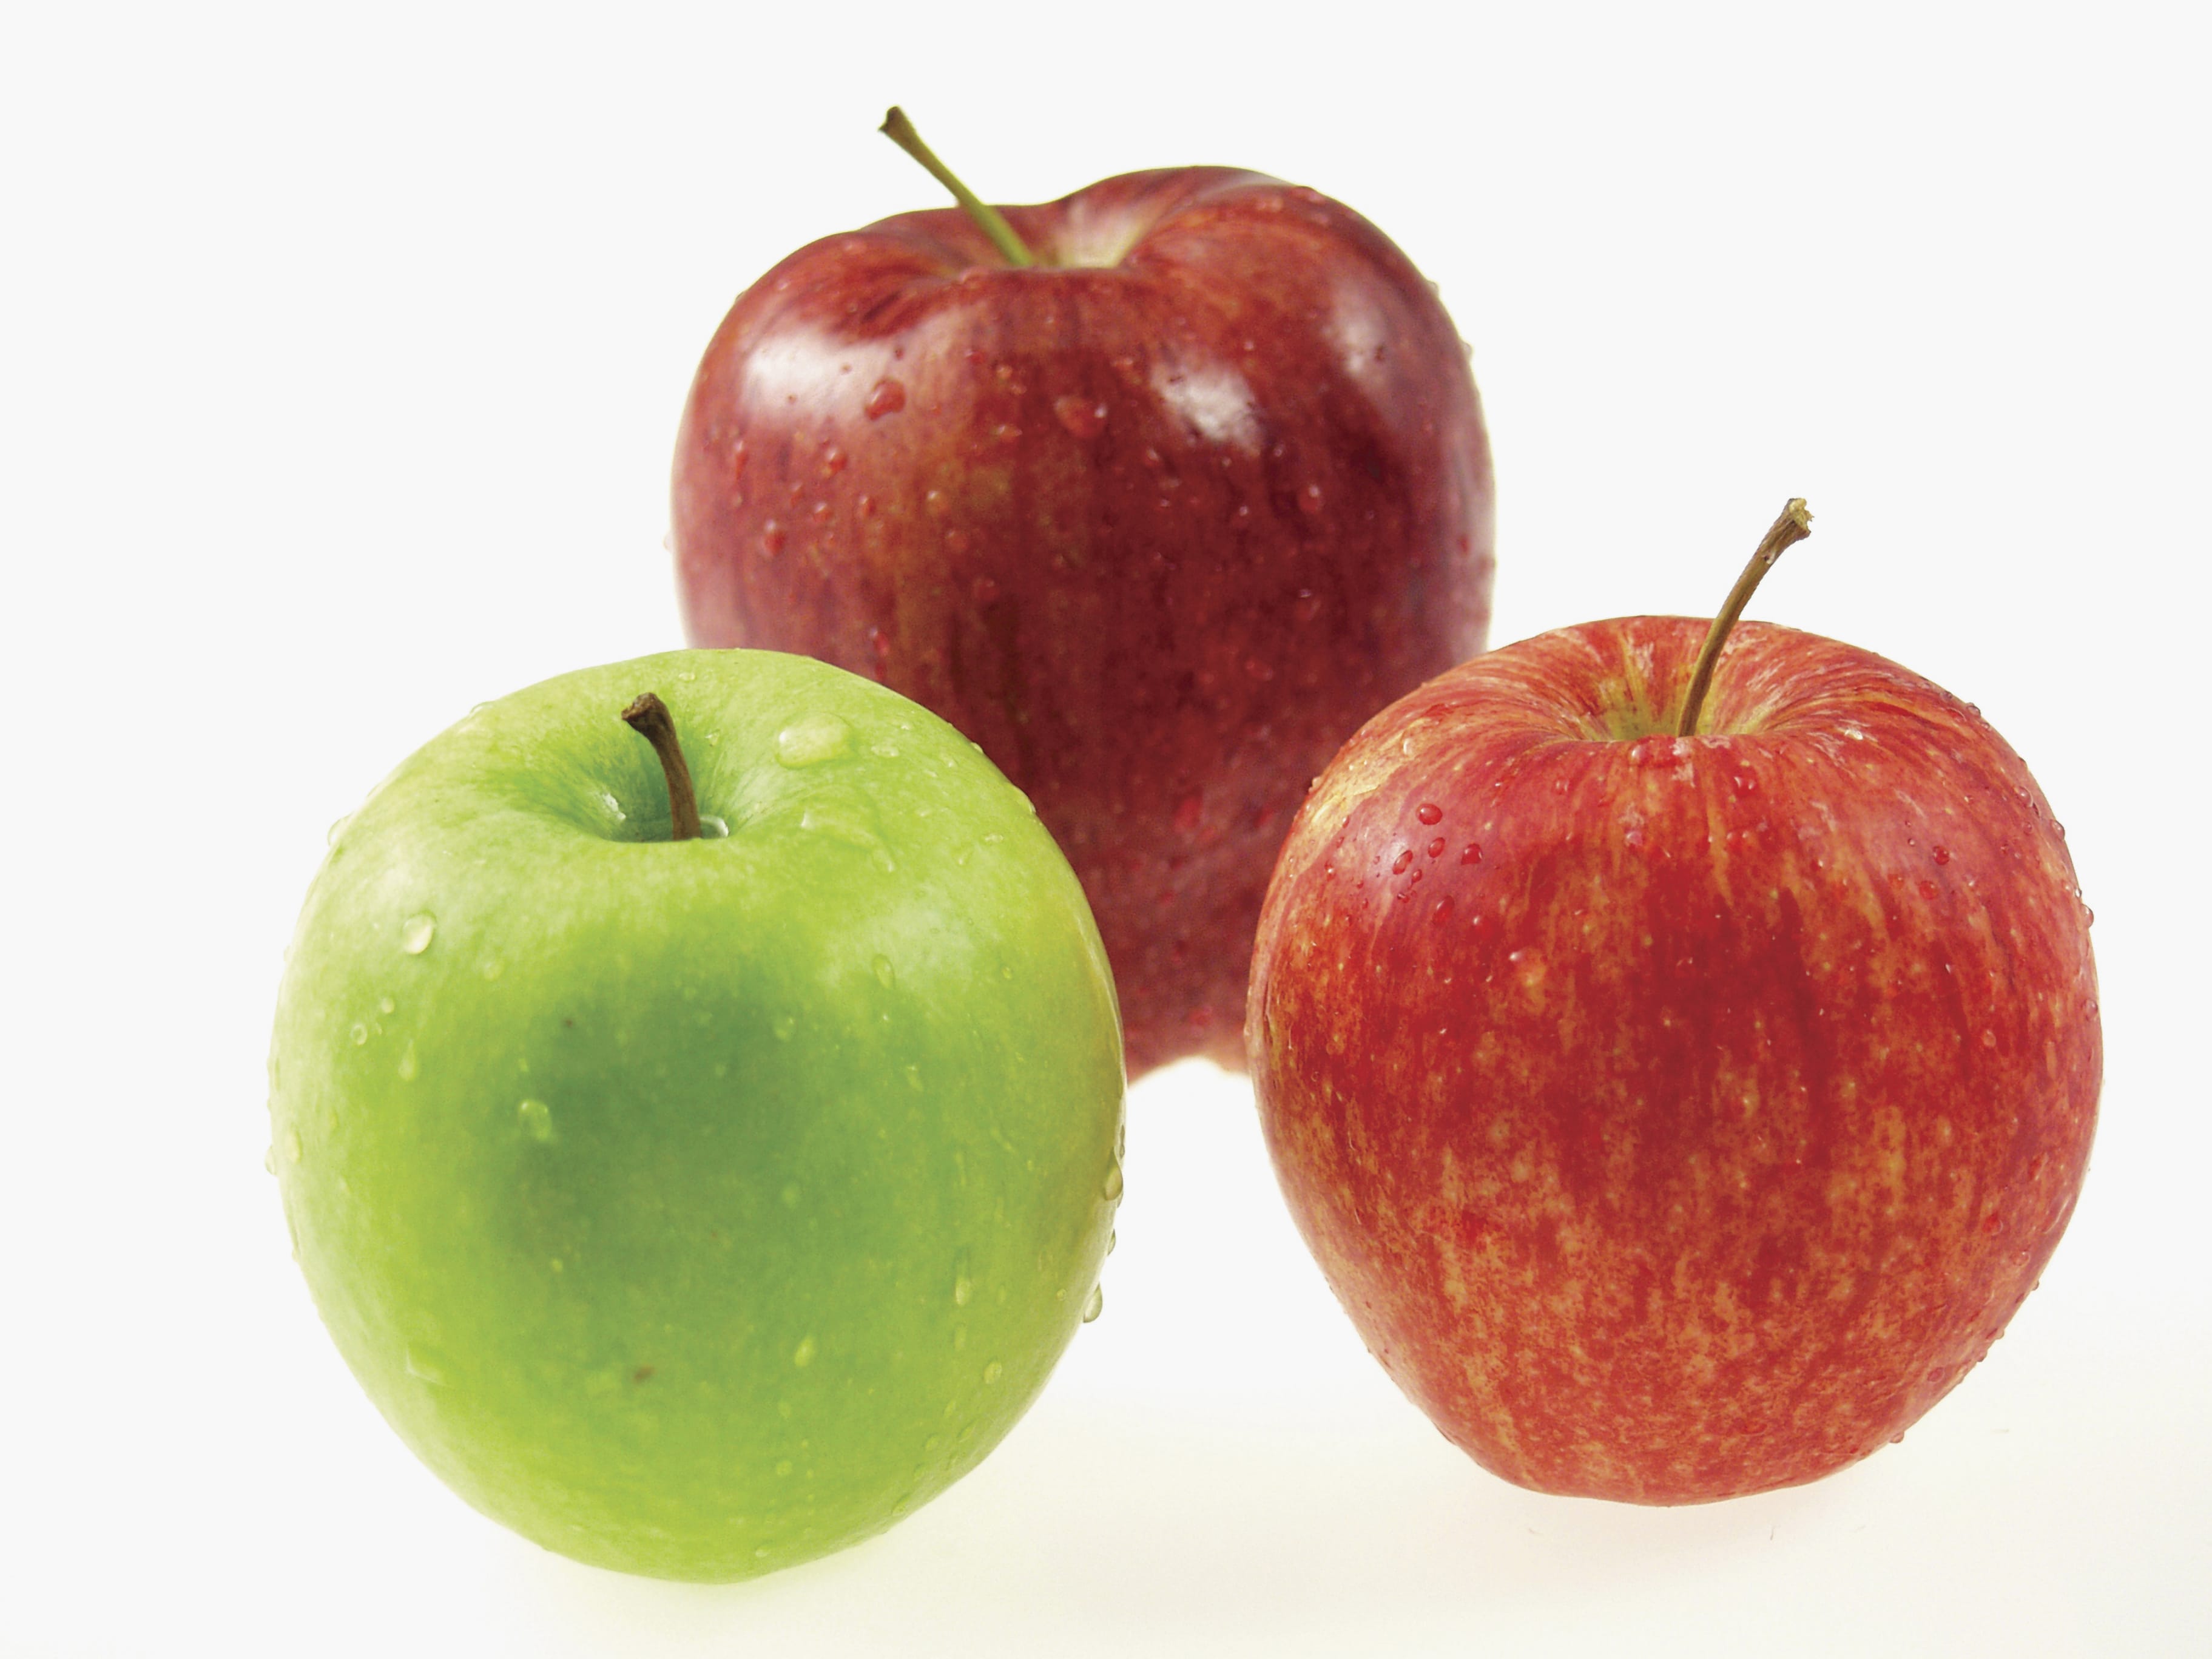 Assorted apples